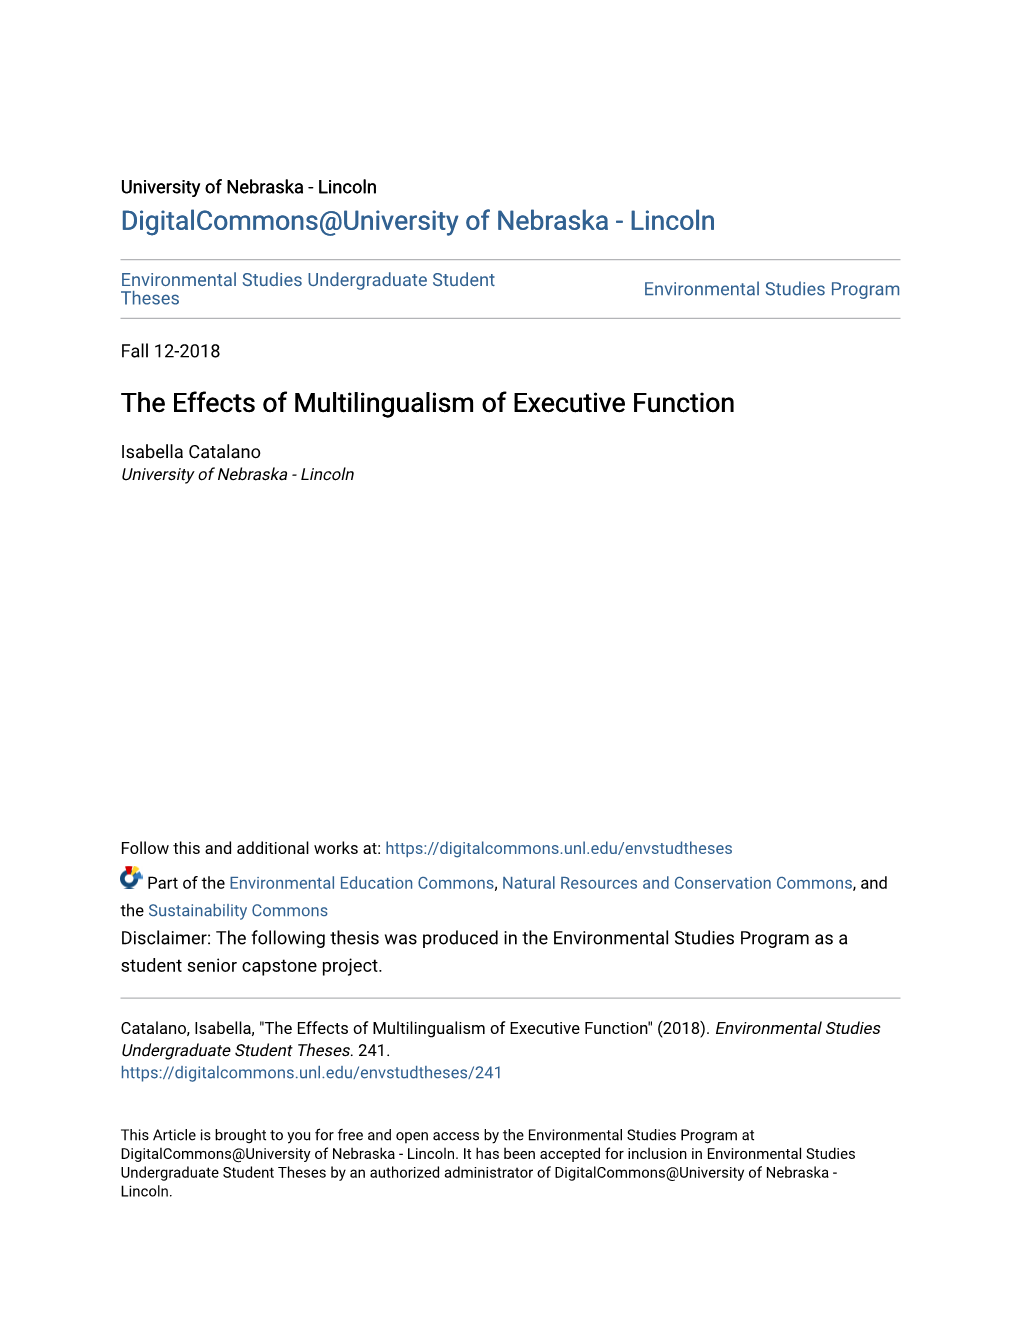 The Effects of Multilingualism of Executive Function